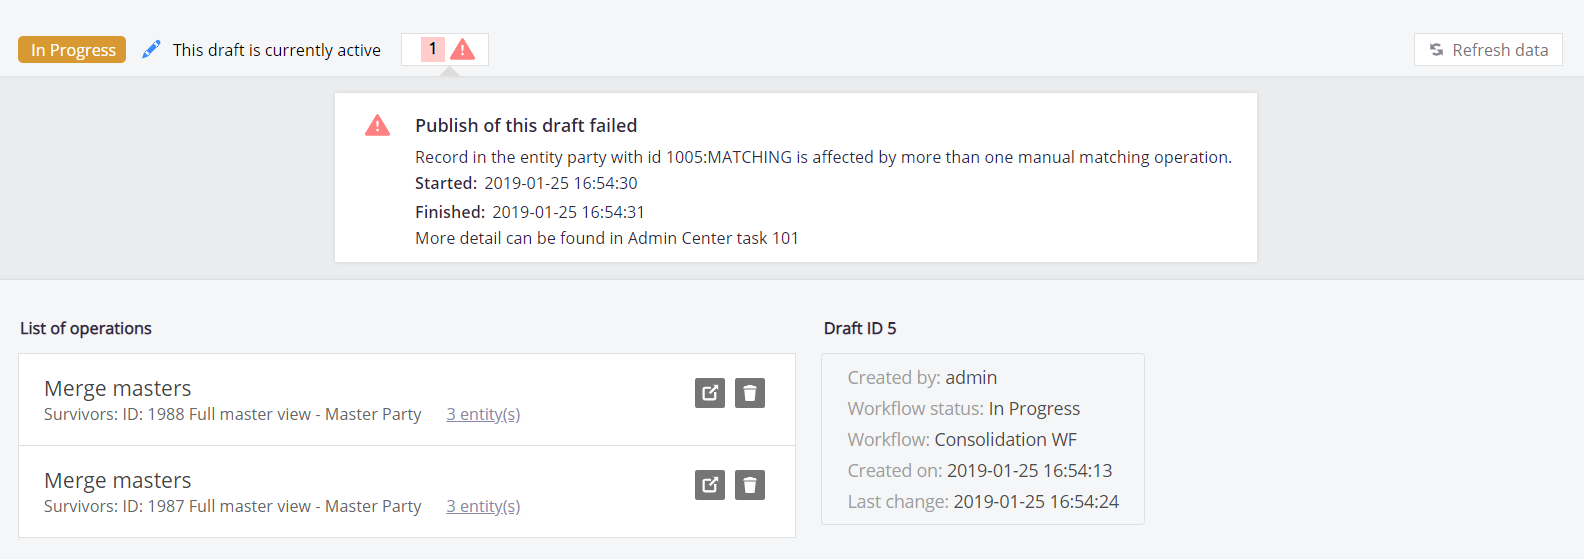 Publishing failed notification in draft detail